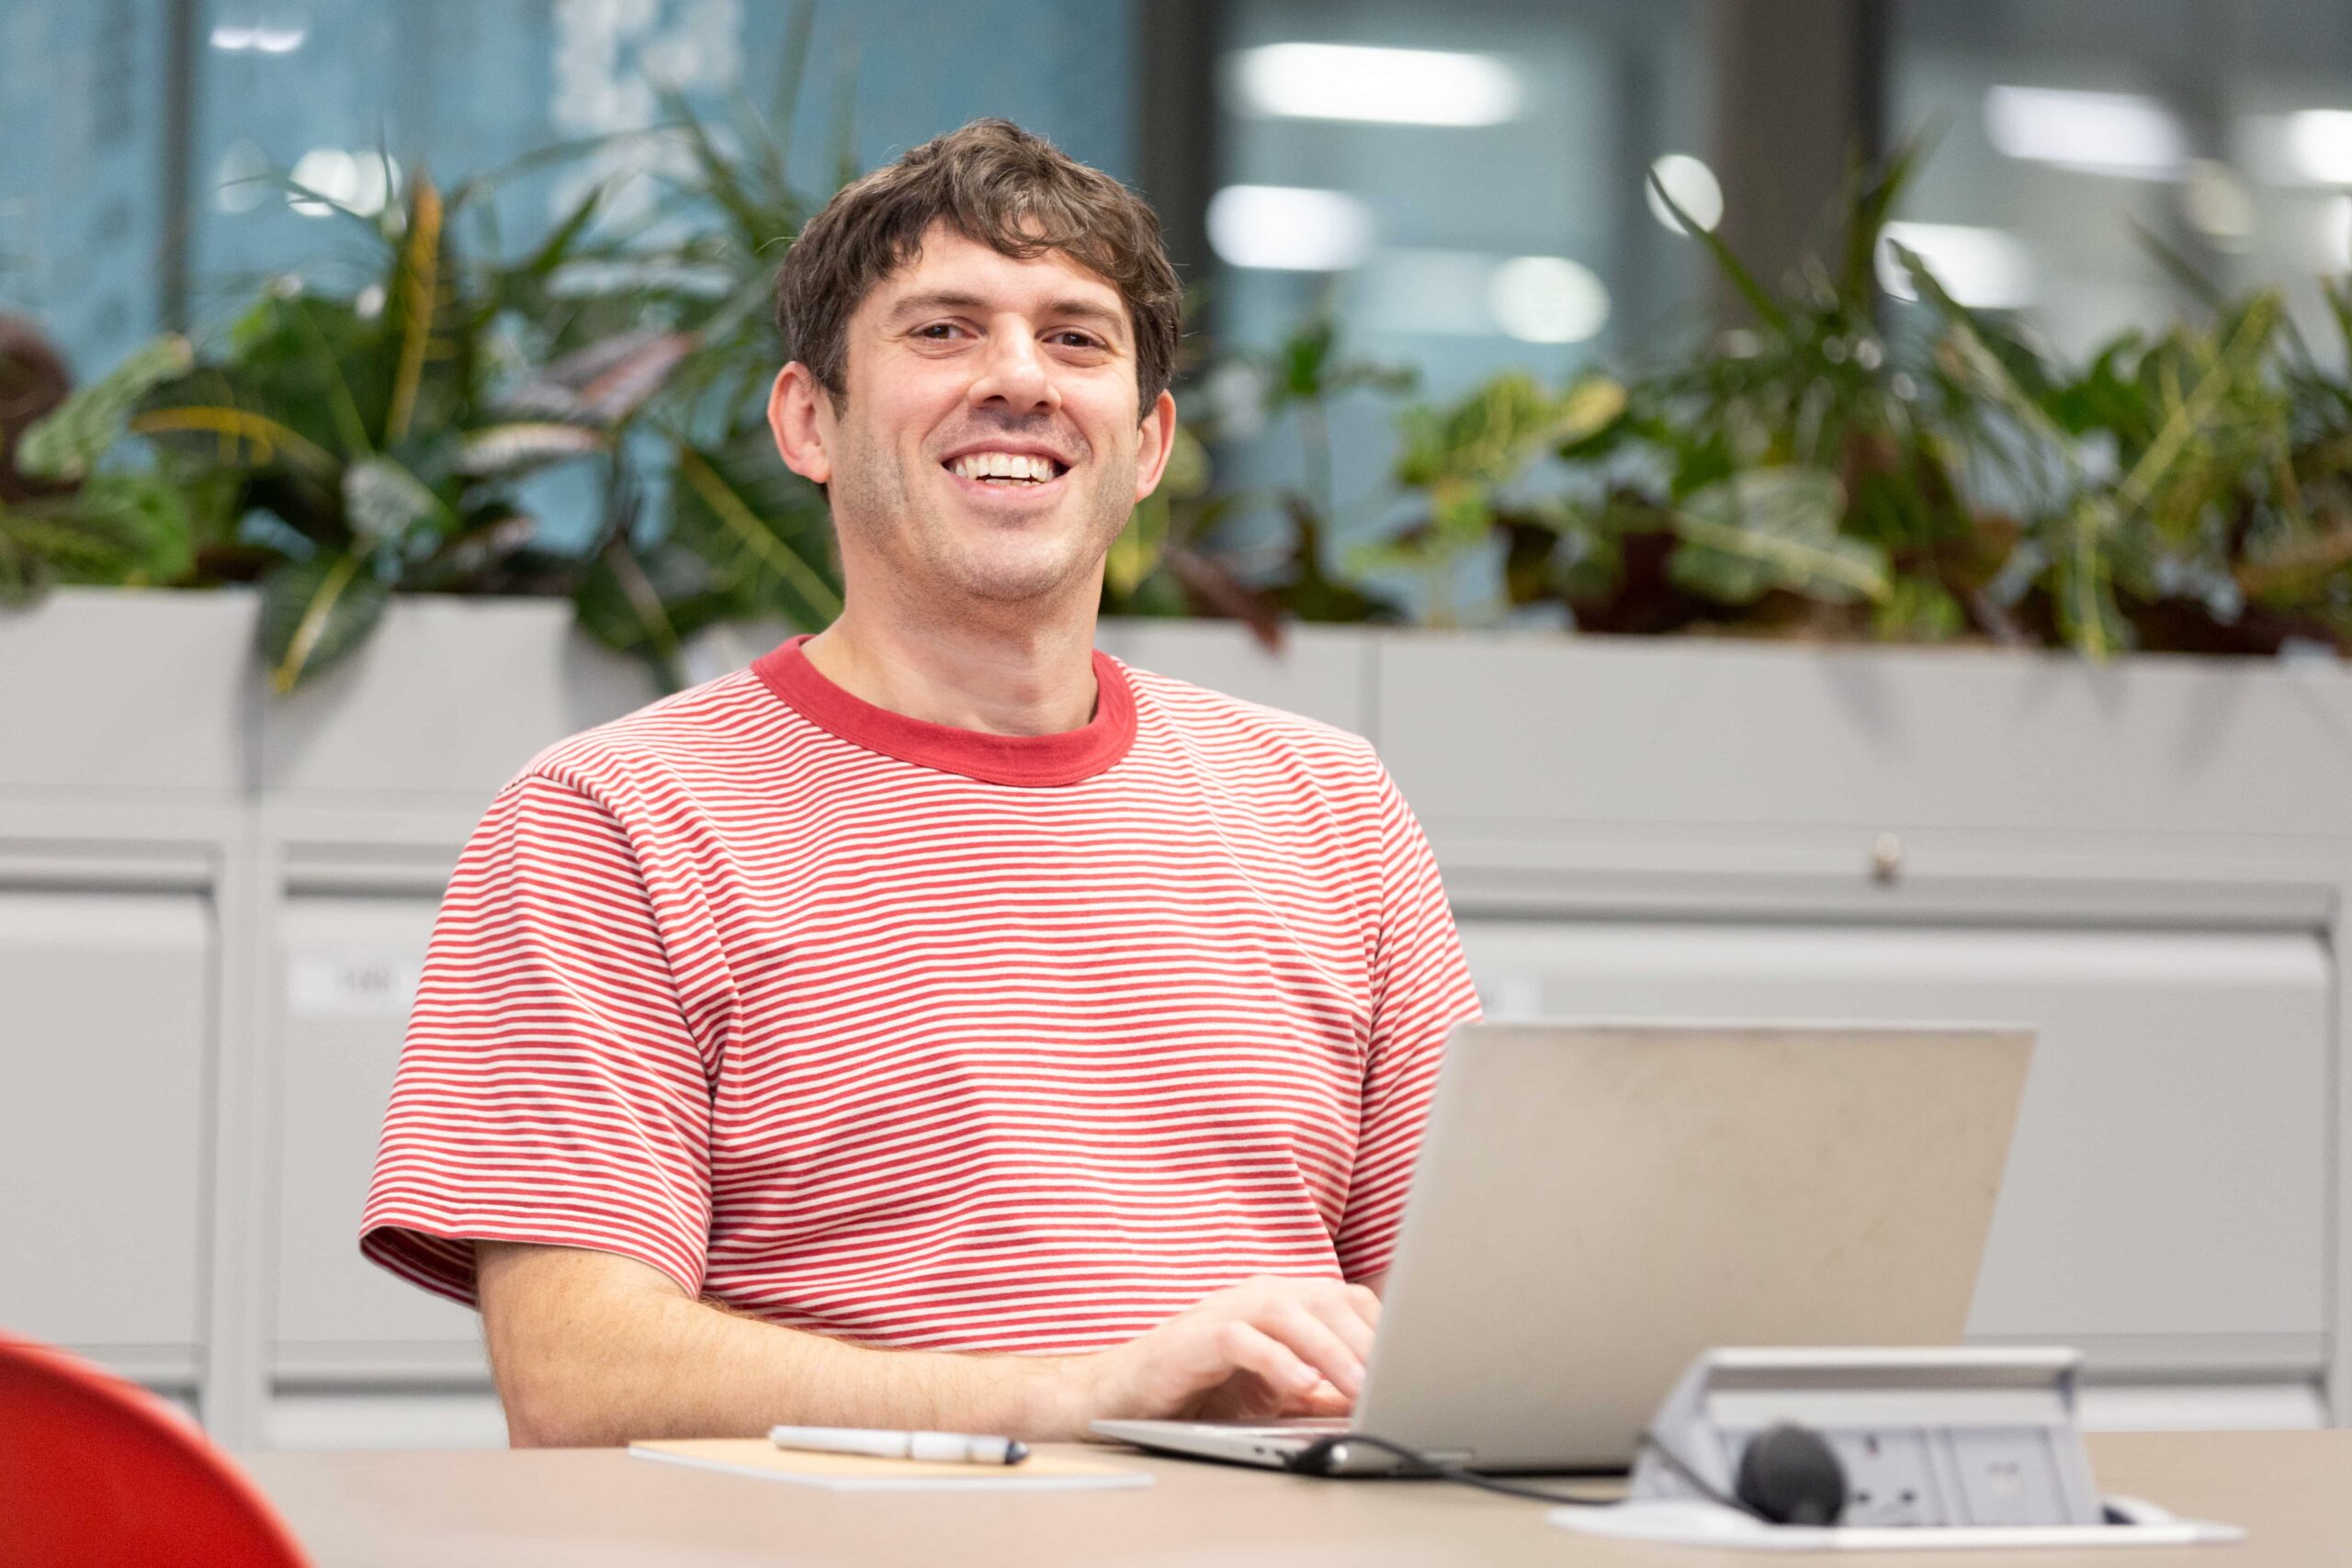 colleague wearing red striped t-shirt sat smiling while working on laptop